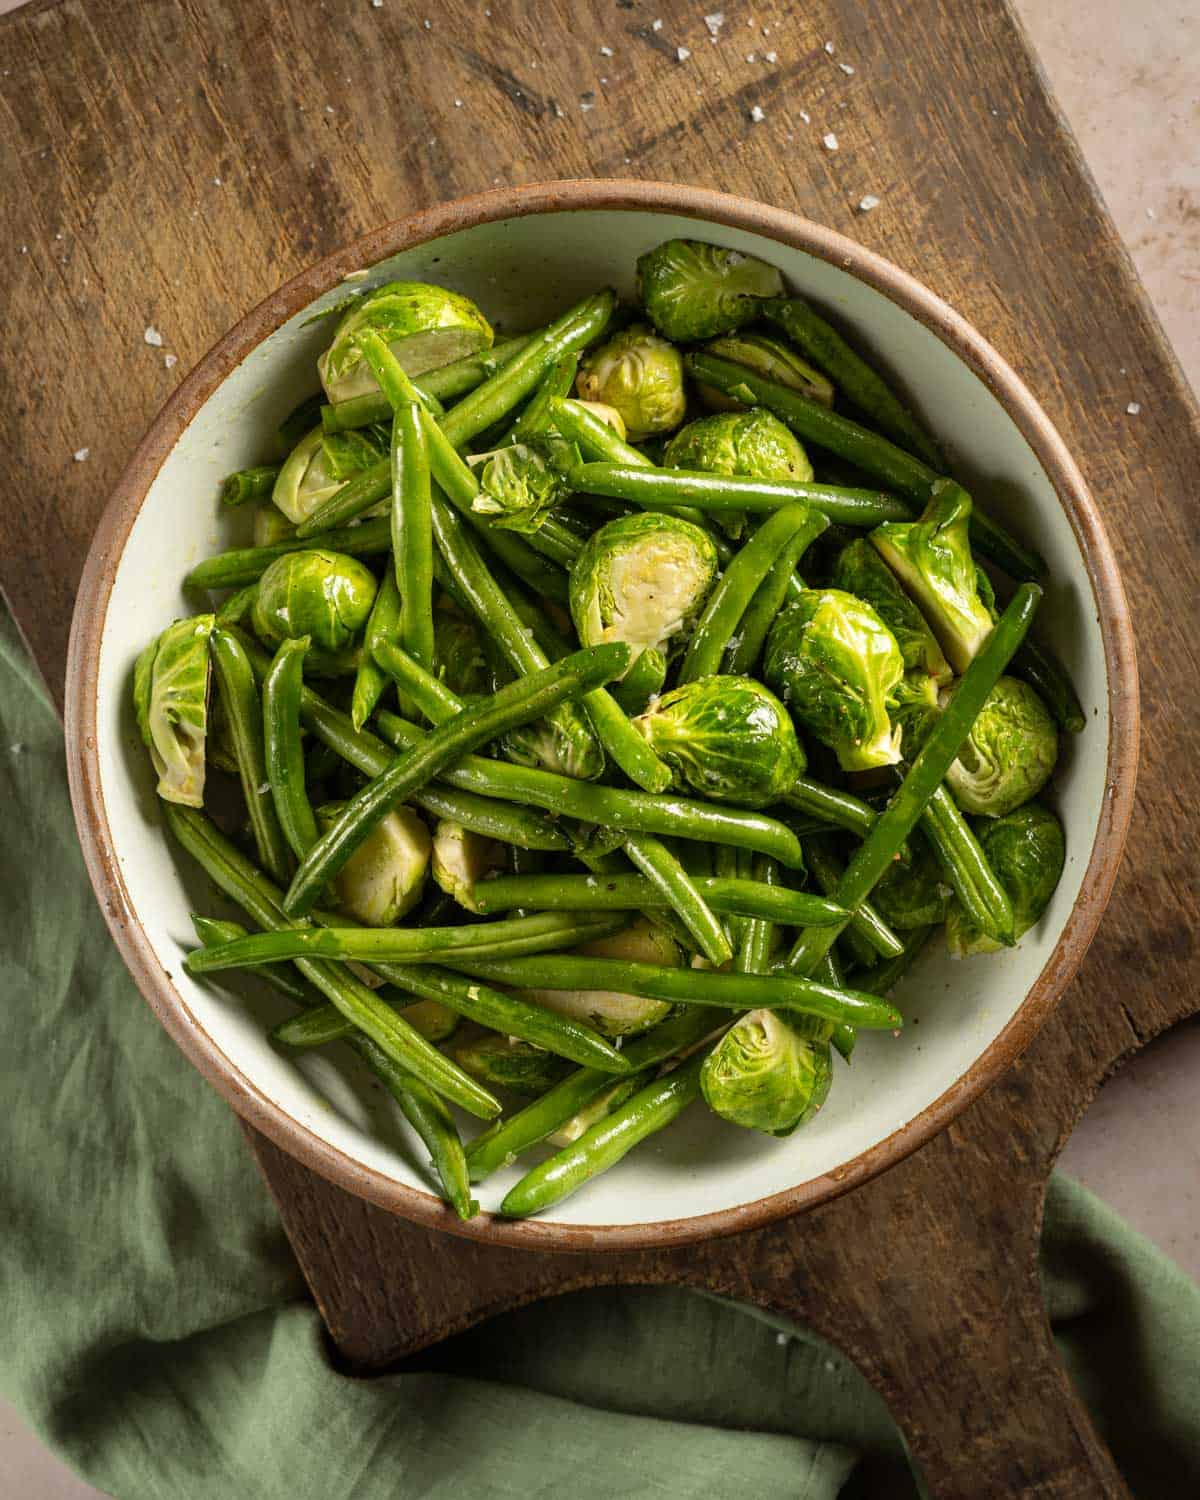 Green beans and brussel sprouts in a bowl tossed with salt and pepper.